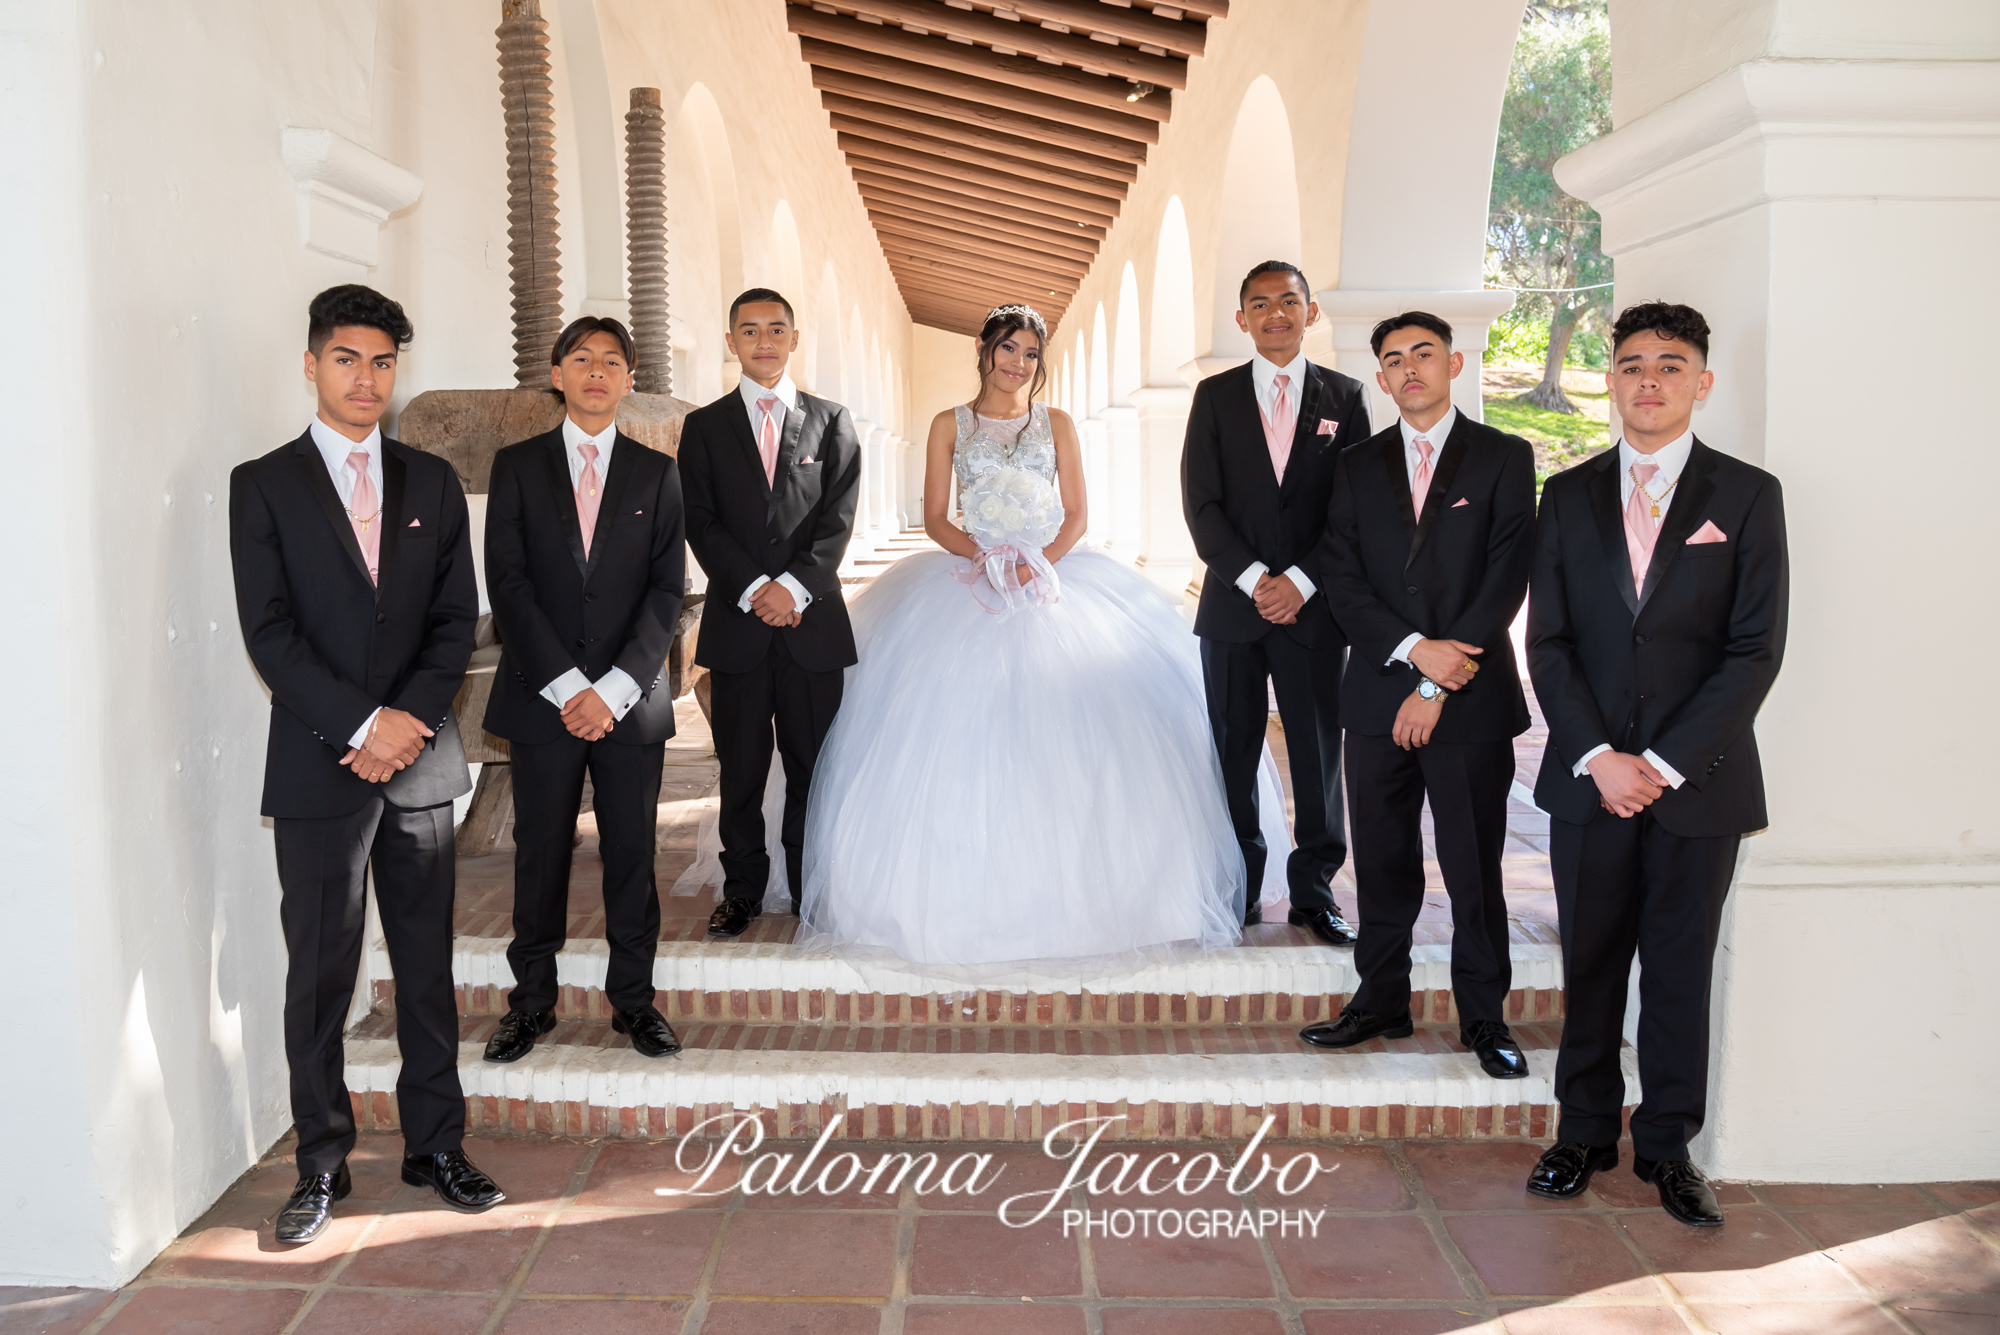 Quinceanera with Chambelanes by Paloma Jacobo Photography